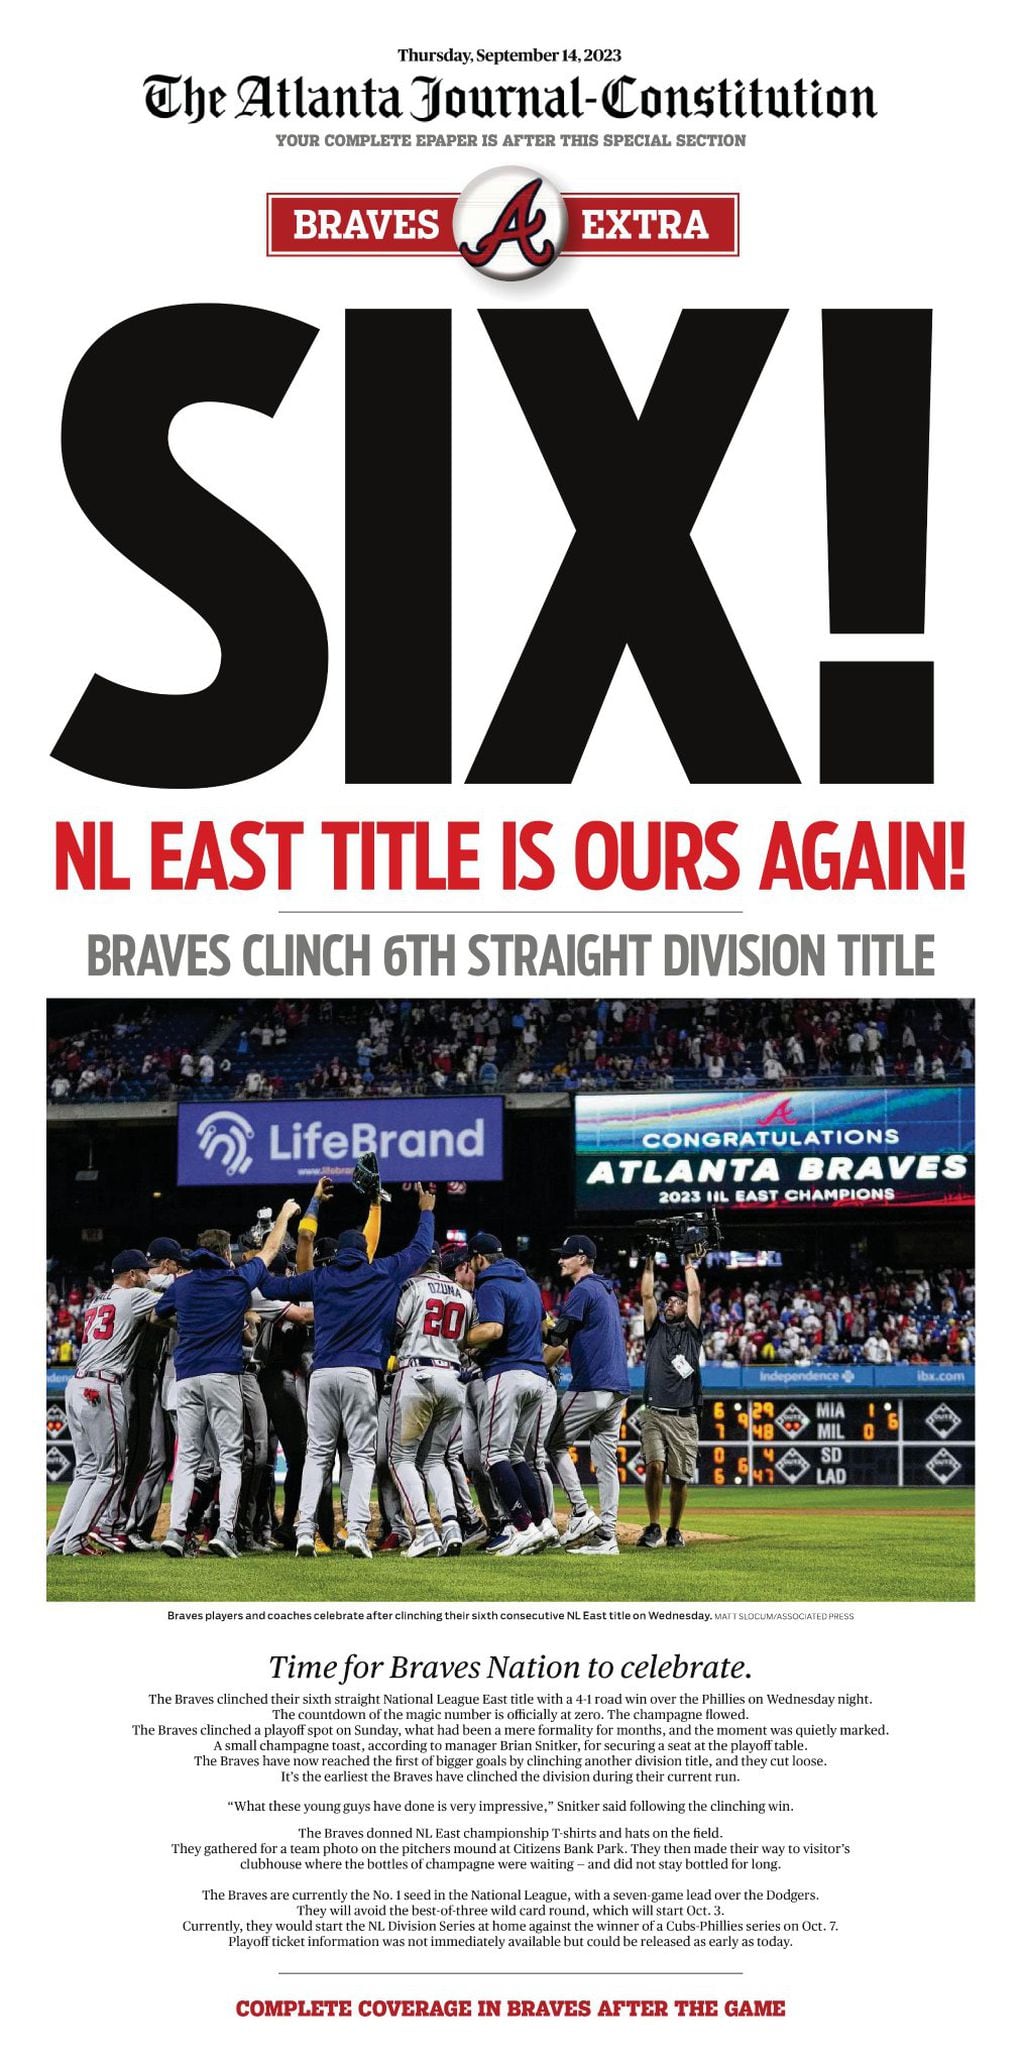 Front page news: See the AJC headline for NL East Champion Atlanta Braves